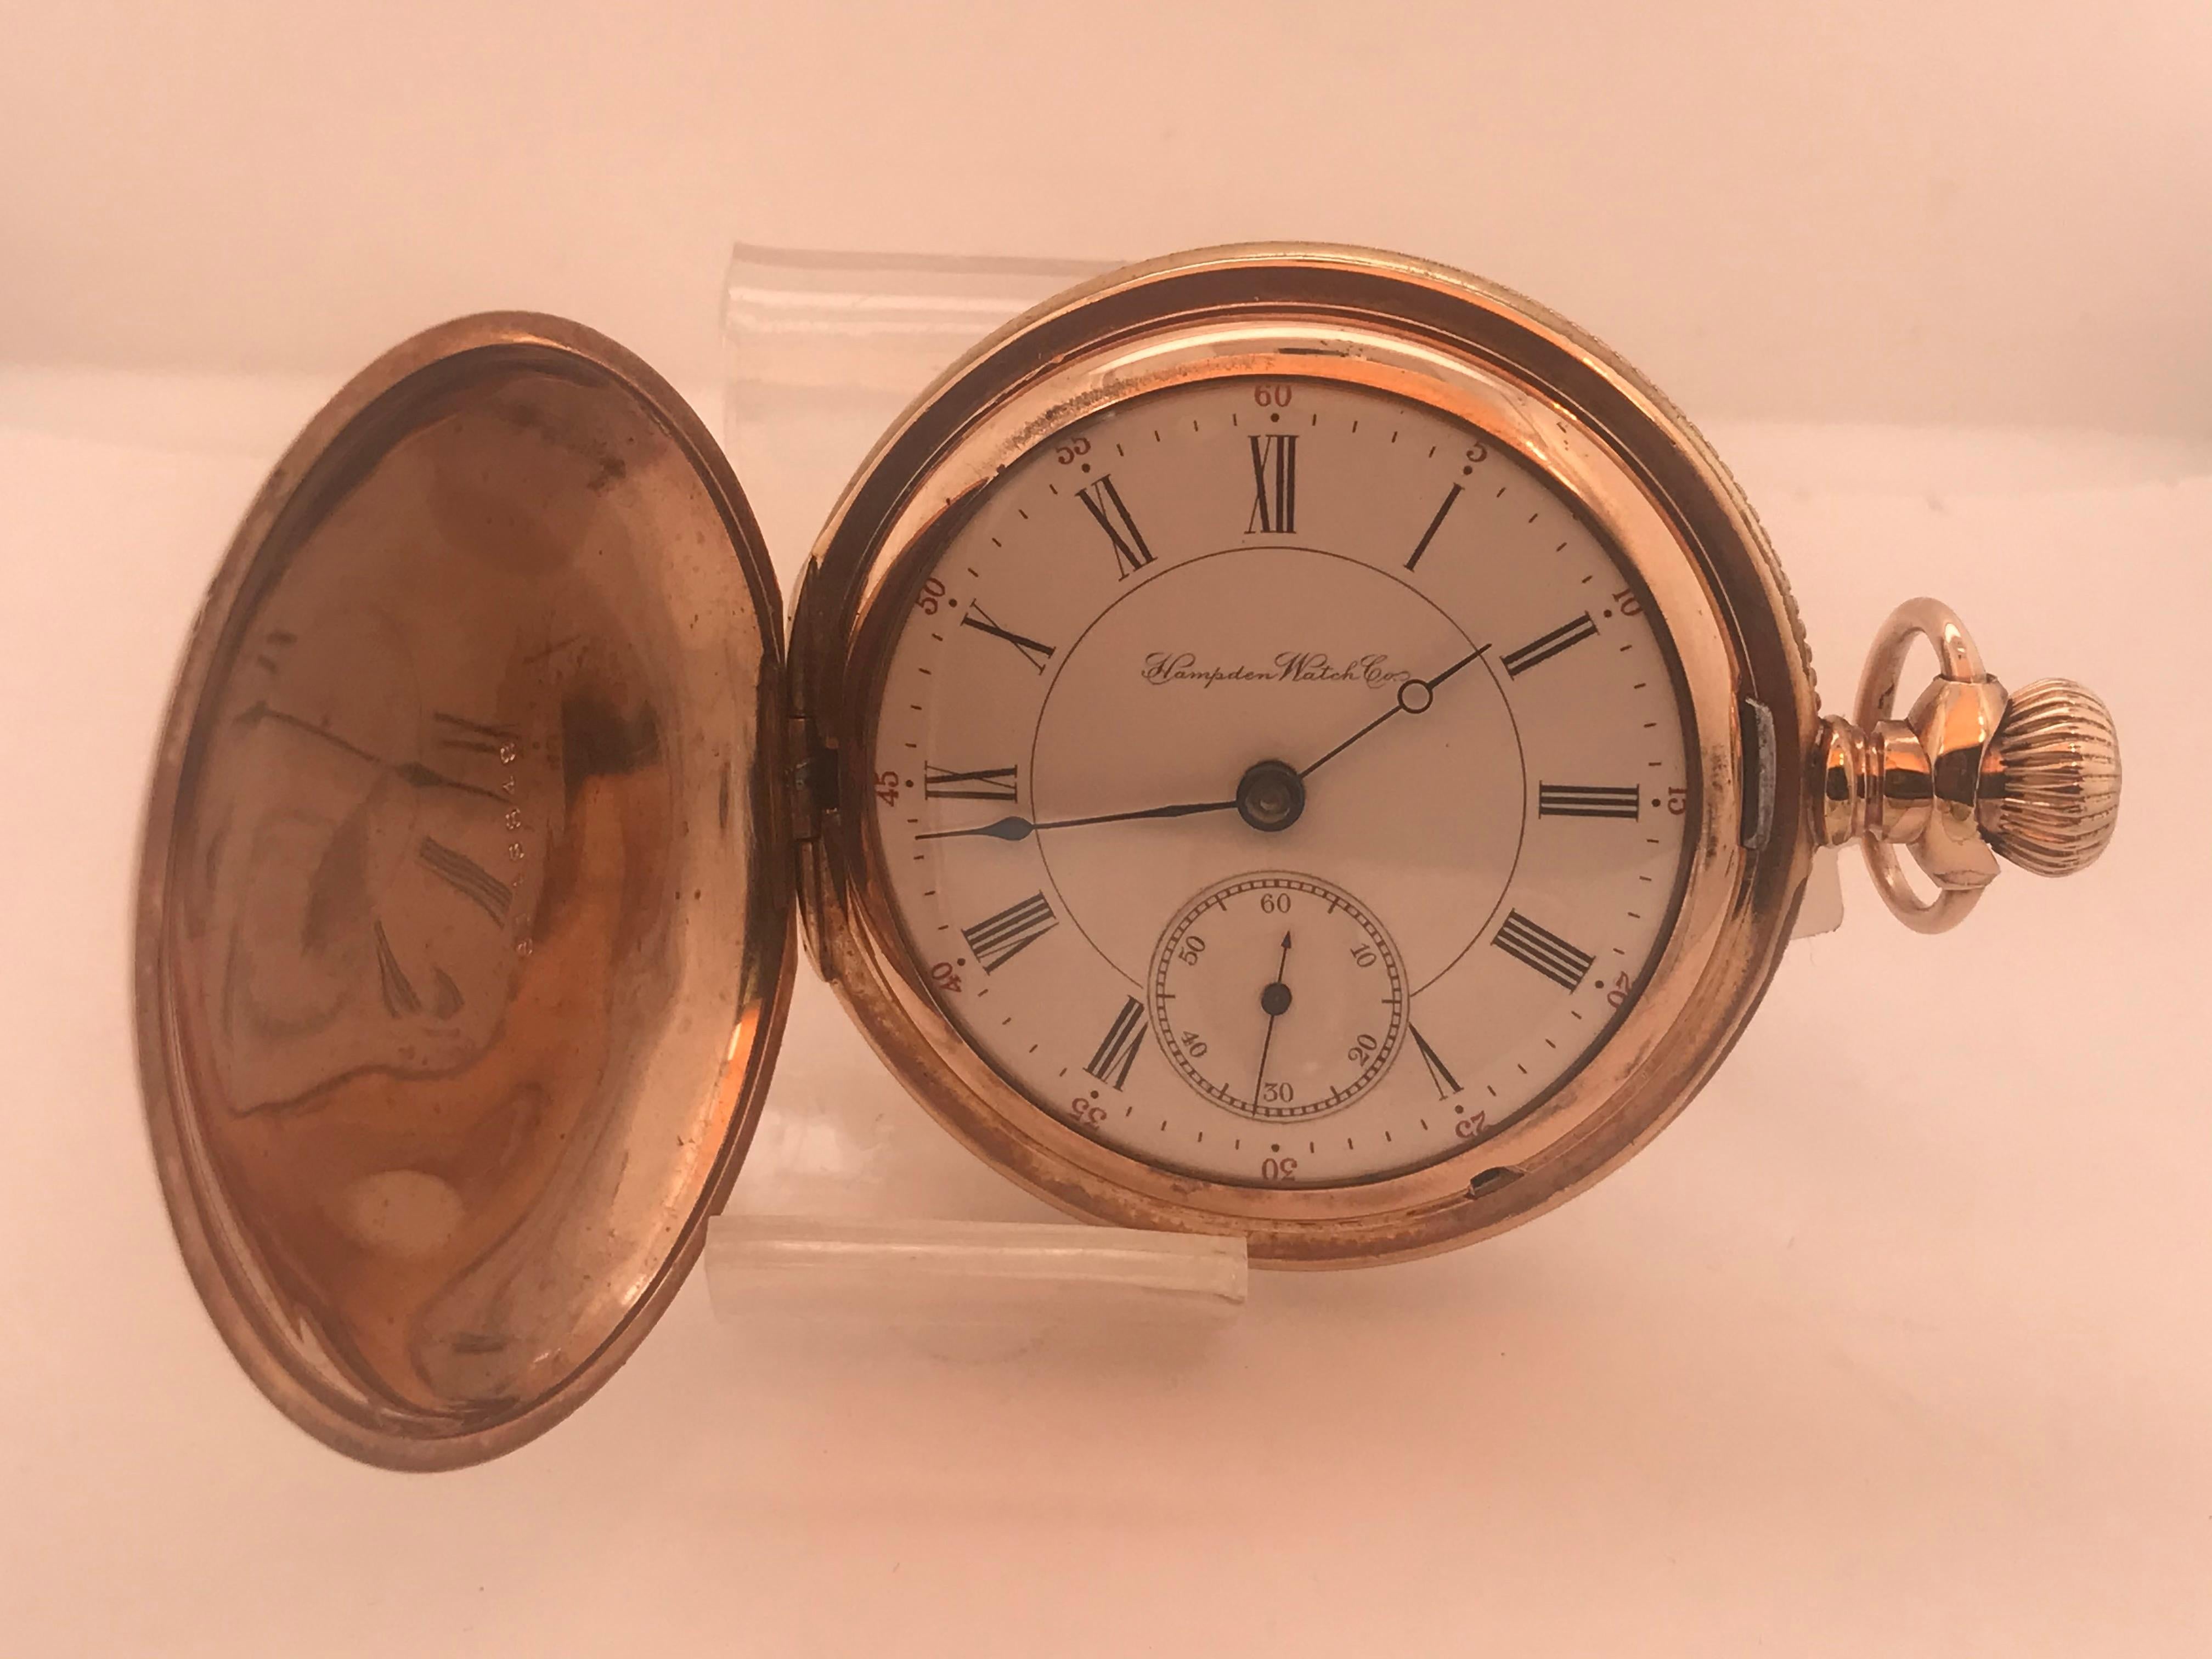 This beautiful hunting case antique is circa 1897. It is a lever set movement with dust cover, 56mms in diameter, serial #1013189, movement #6148849. This is a great addition for any true pocket watch collector!